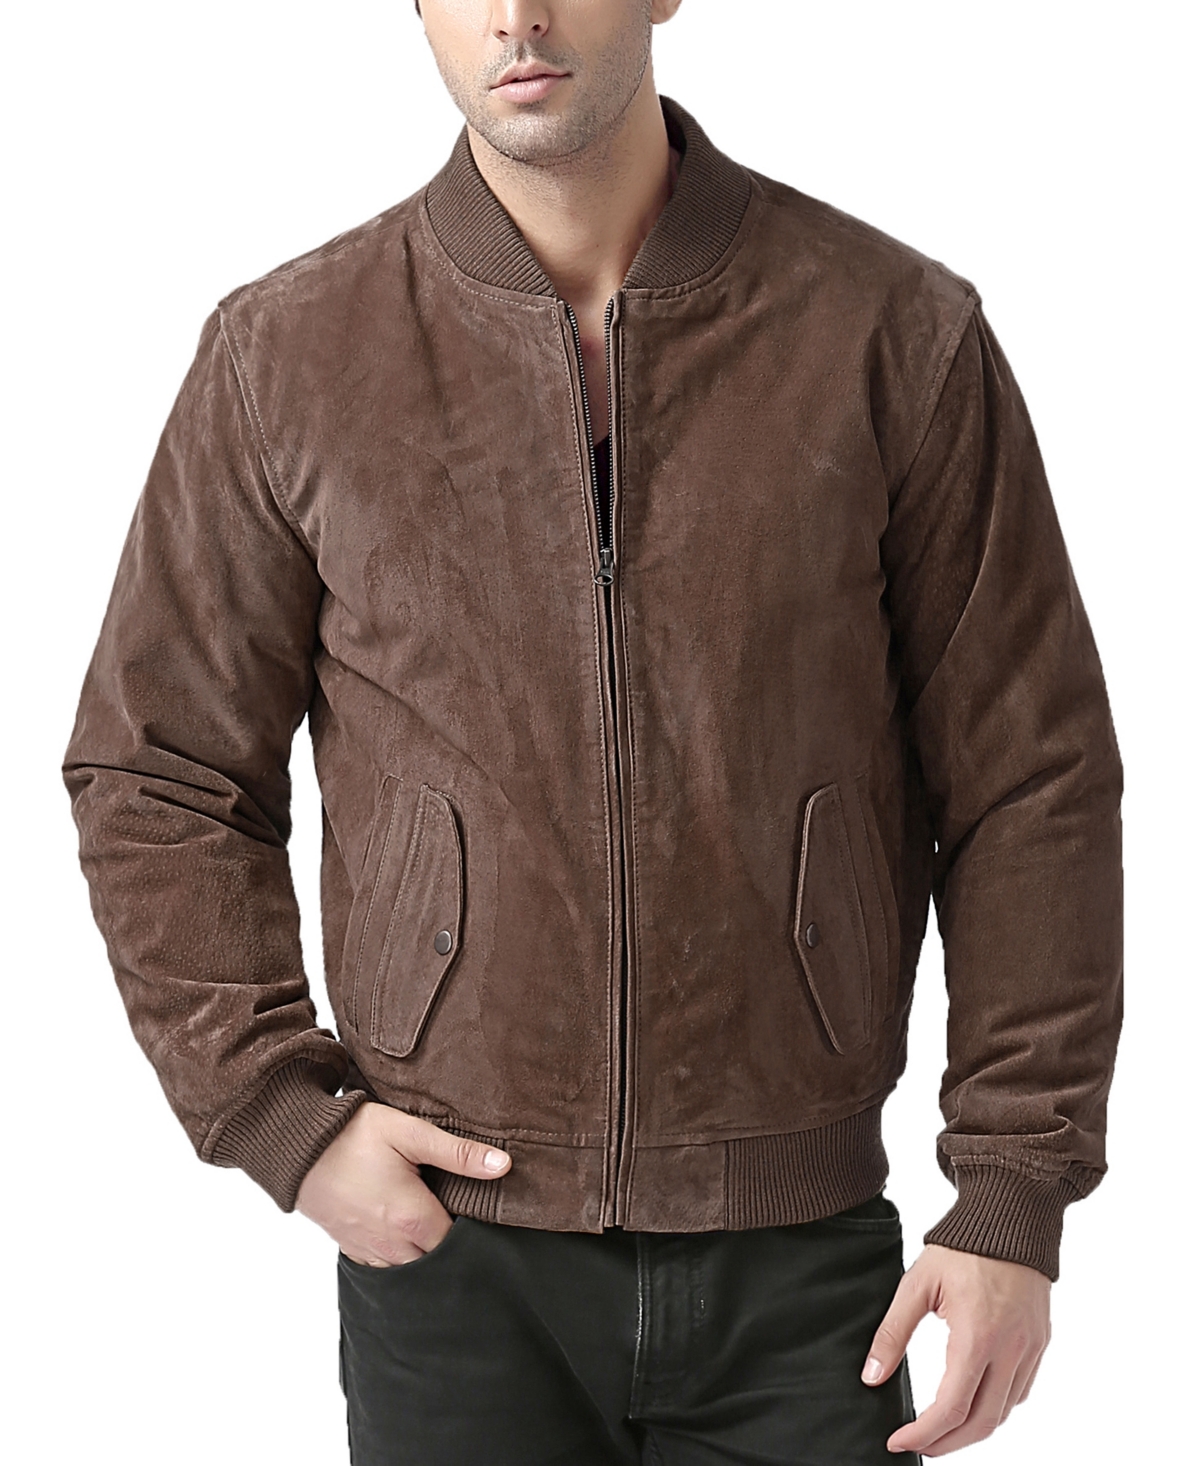 Men Urban Leather Bomber Jacket - Big and Tall - Navy